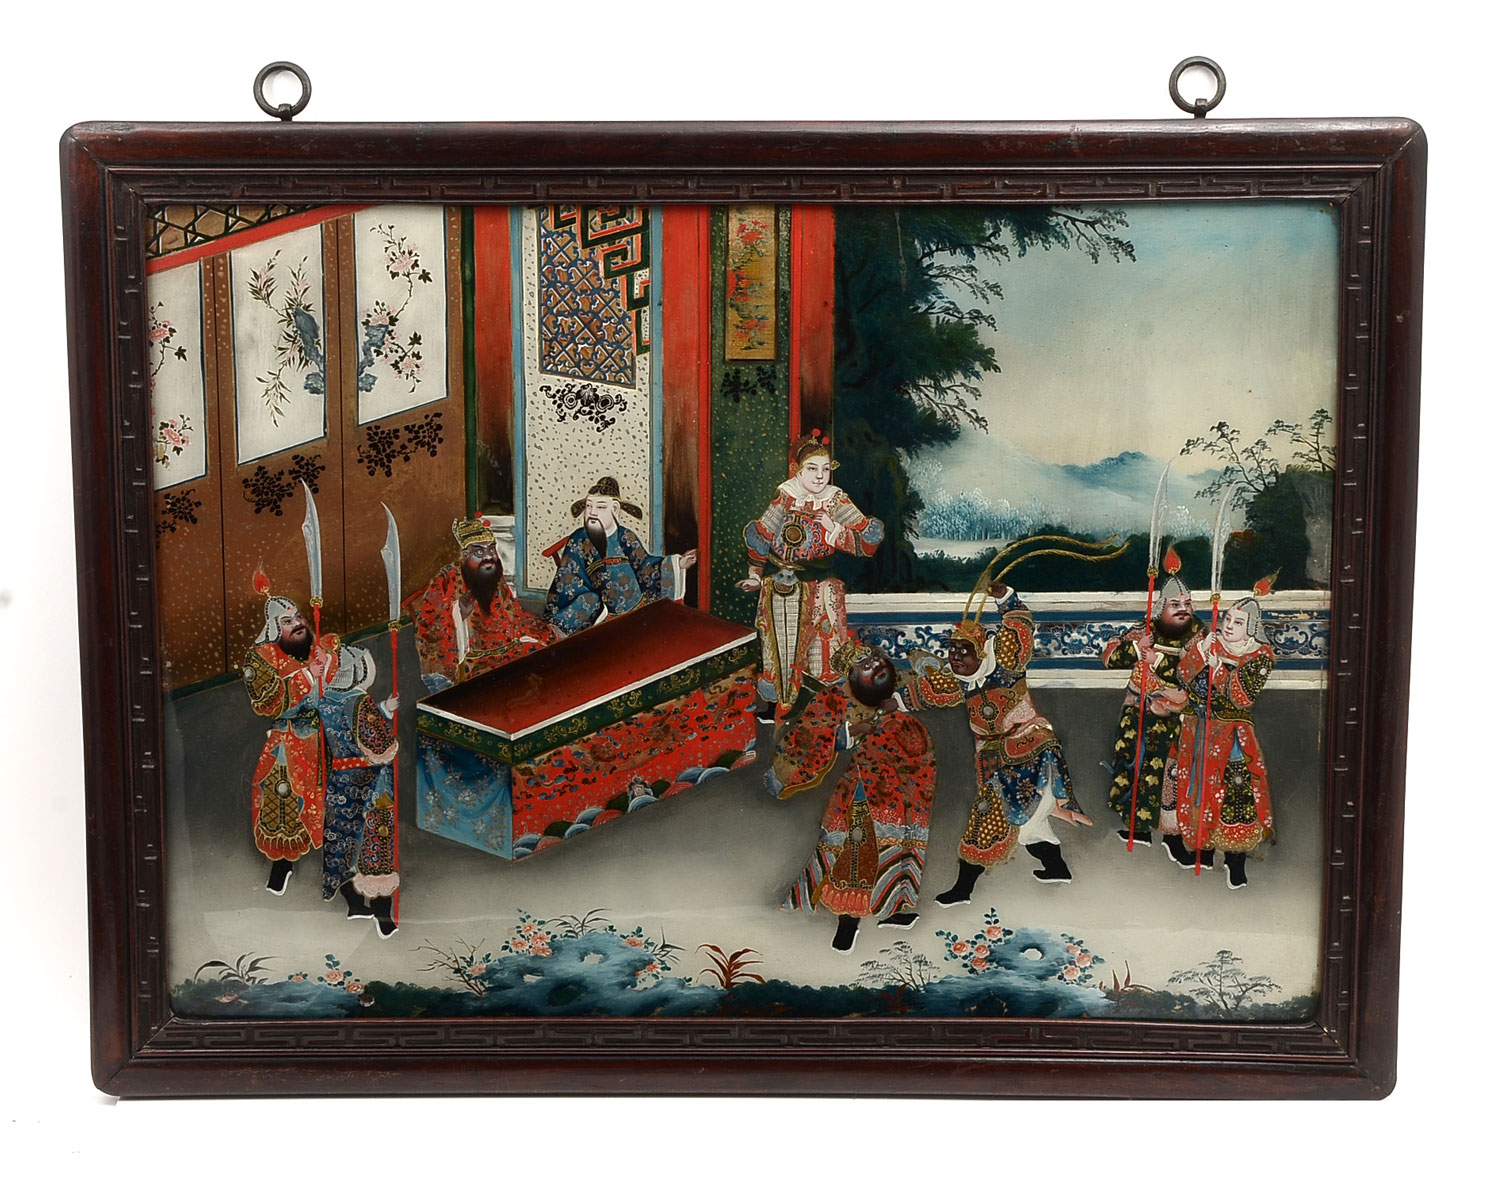 CHINESE REVERSE PAINTING ON GLASS: